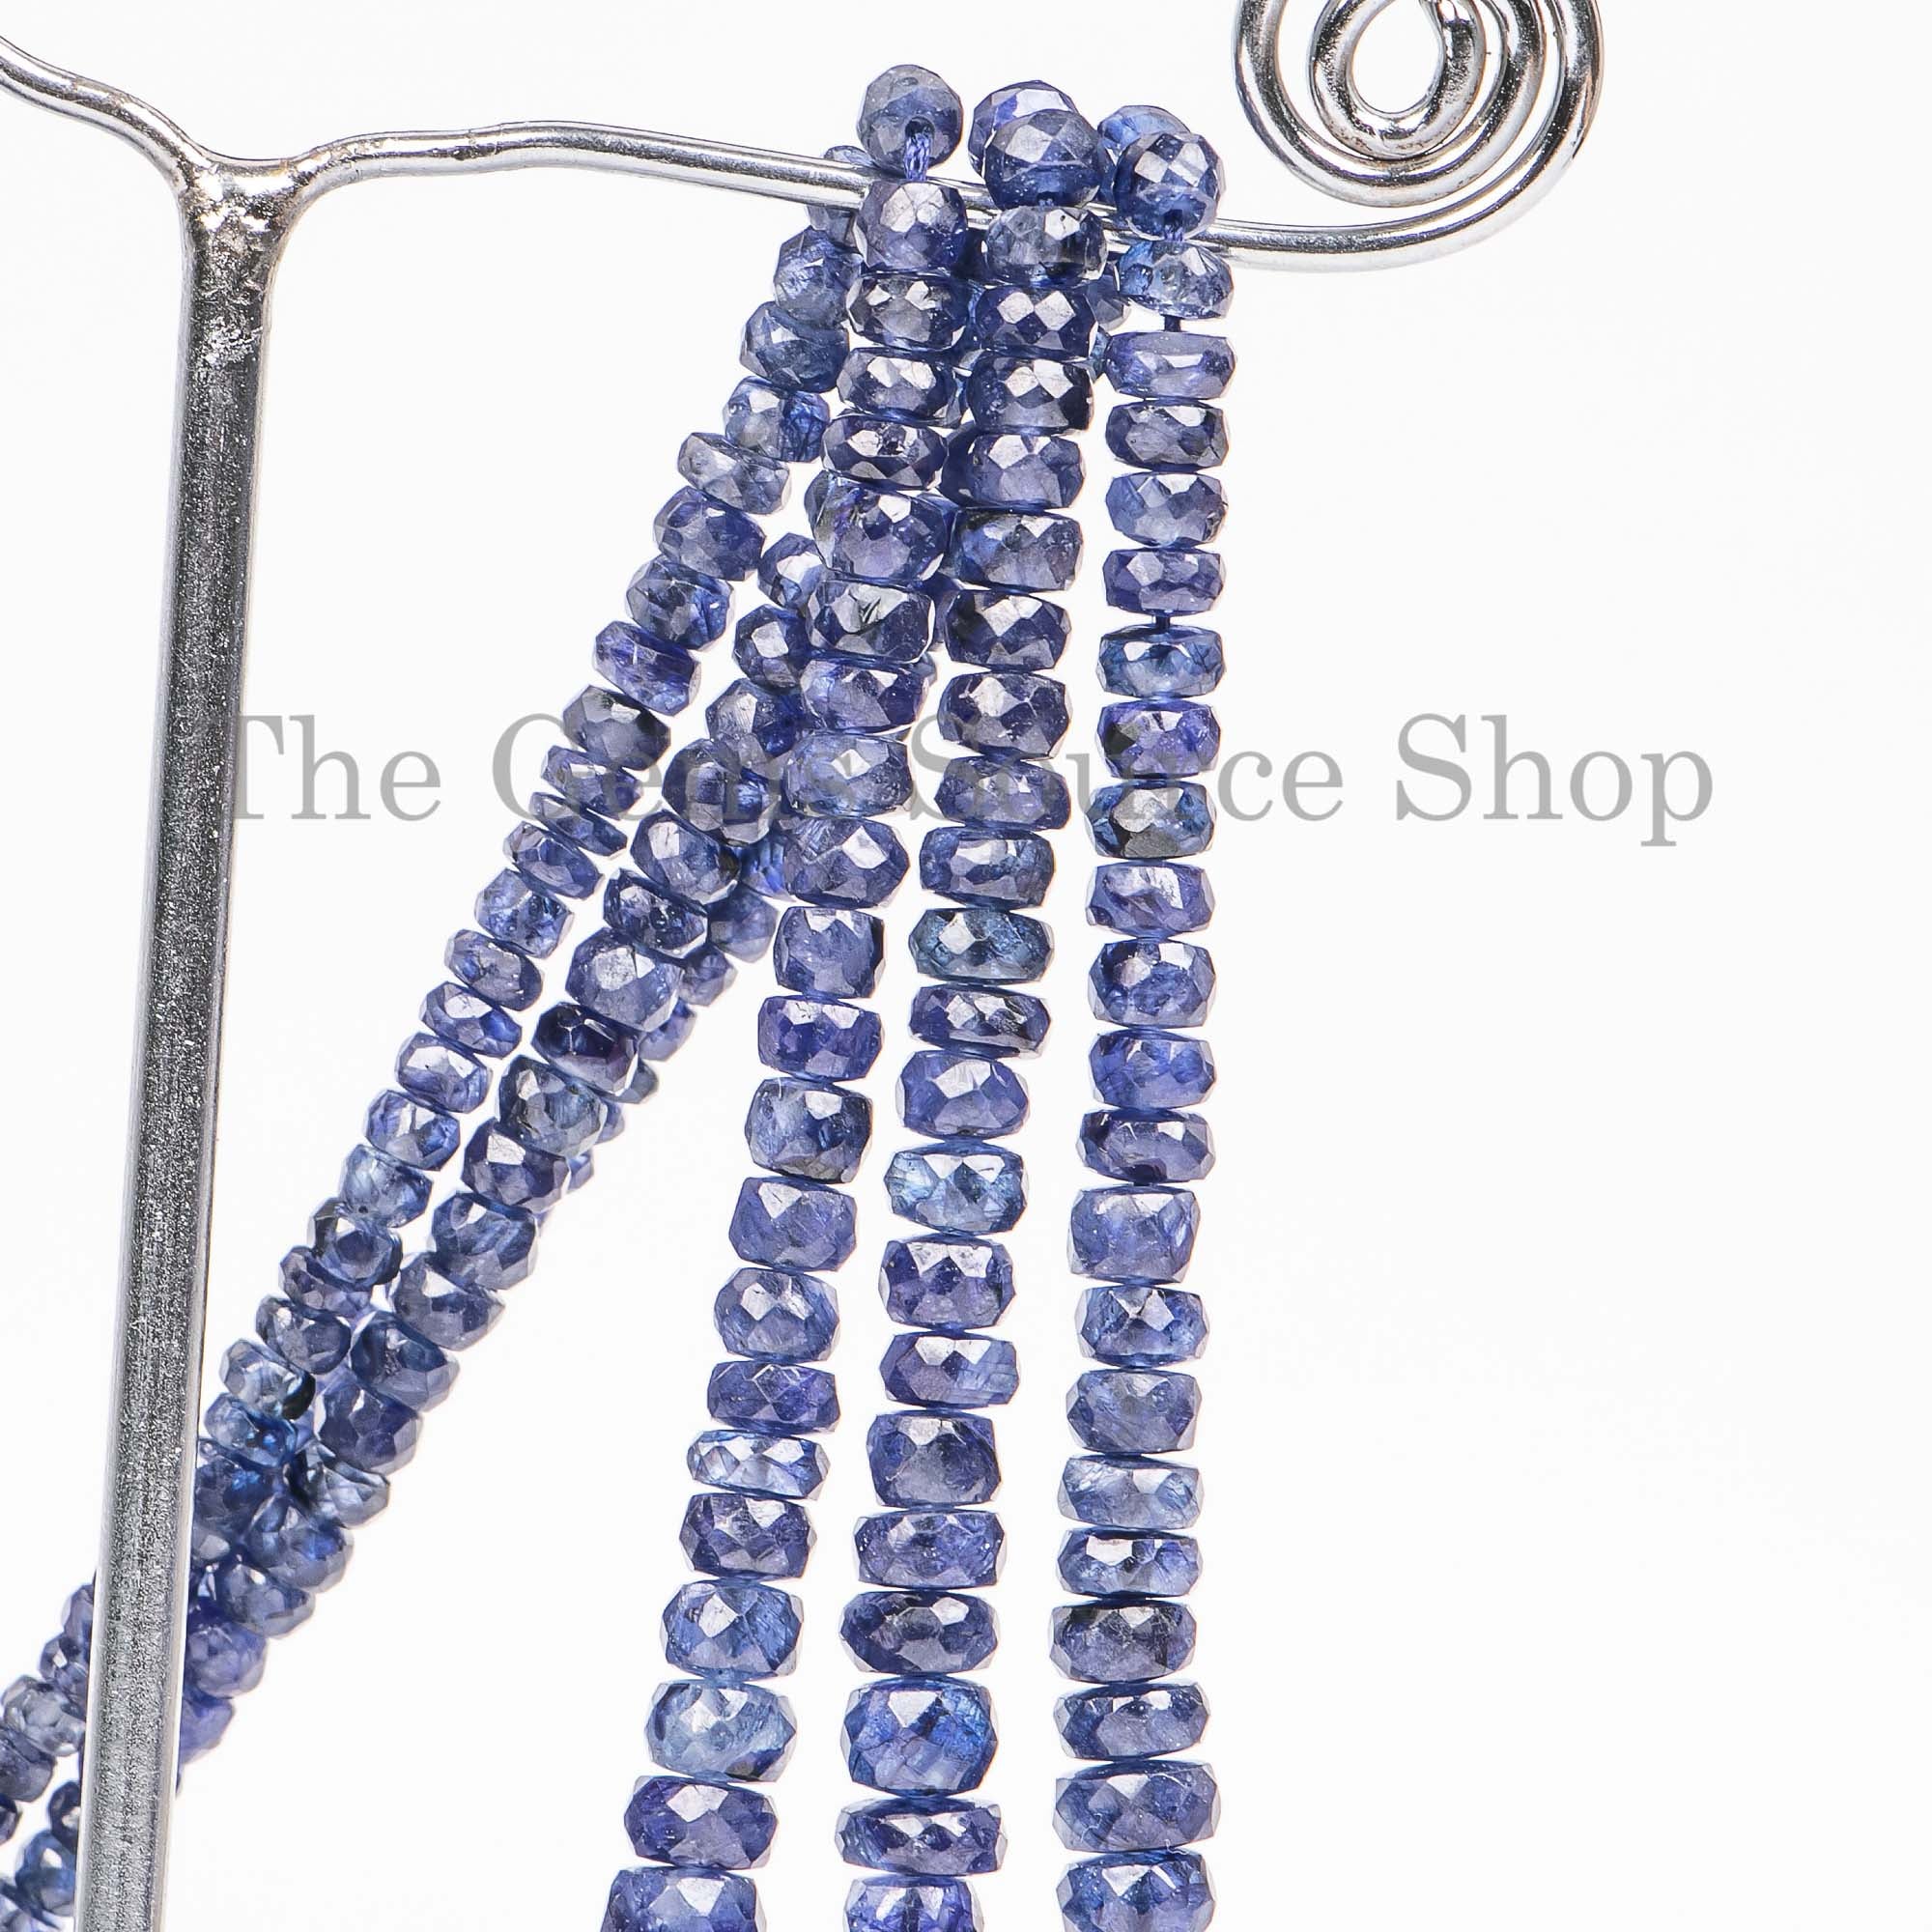 Natural Blue Sapphire Faceted Beads, Blue Sapphire Rondelle Beads, Gemstone Beads